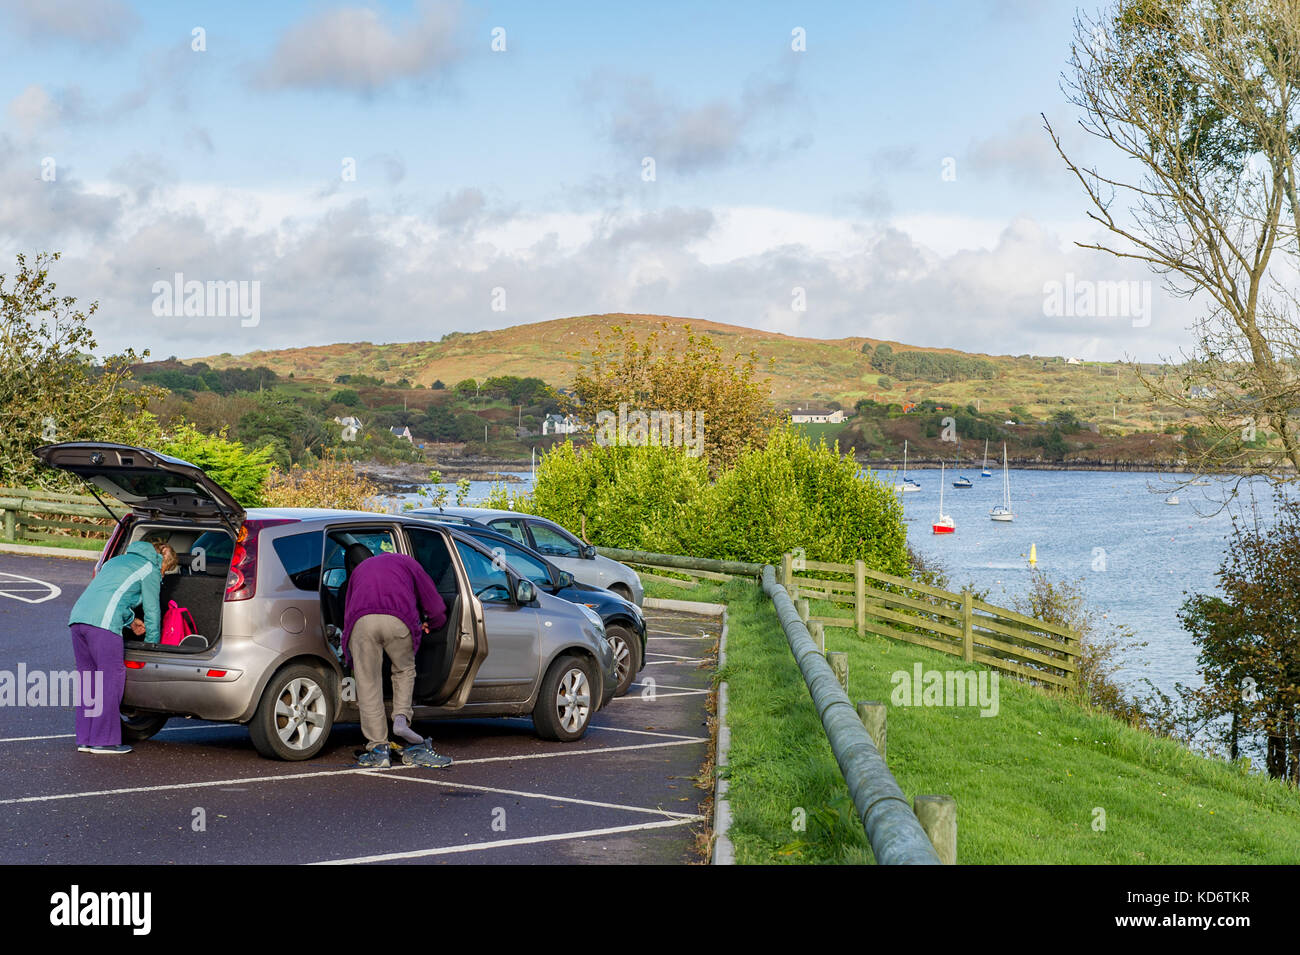 Walkers in Schull, Ireland preparing to leave their car for a walk or ramble with copy space. Stock Photo